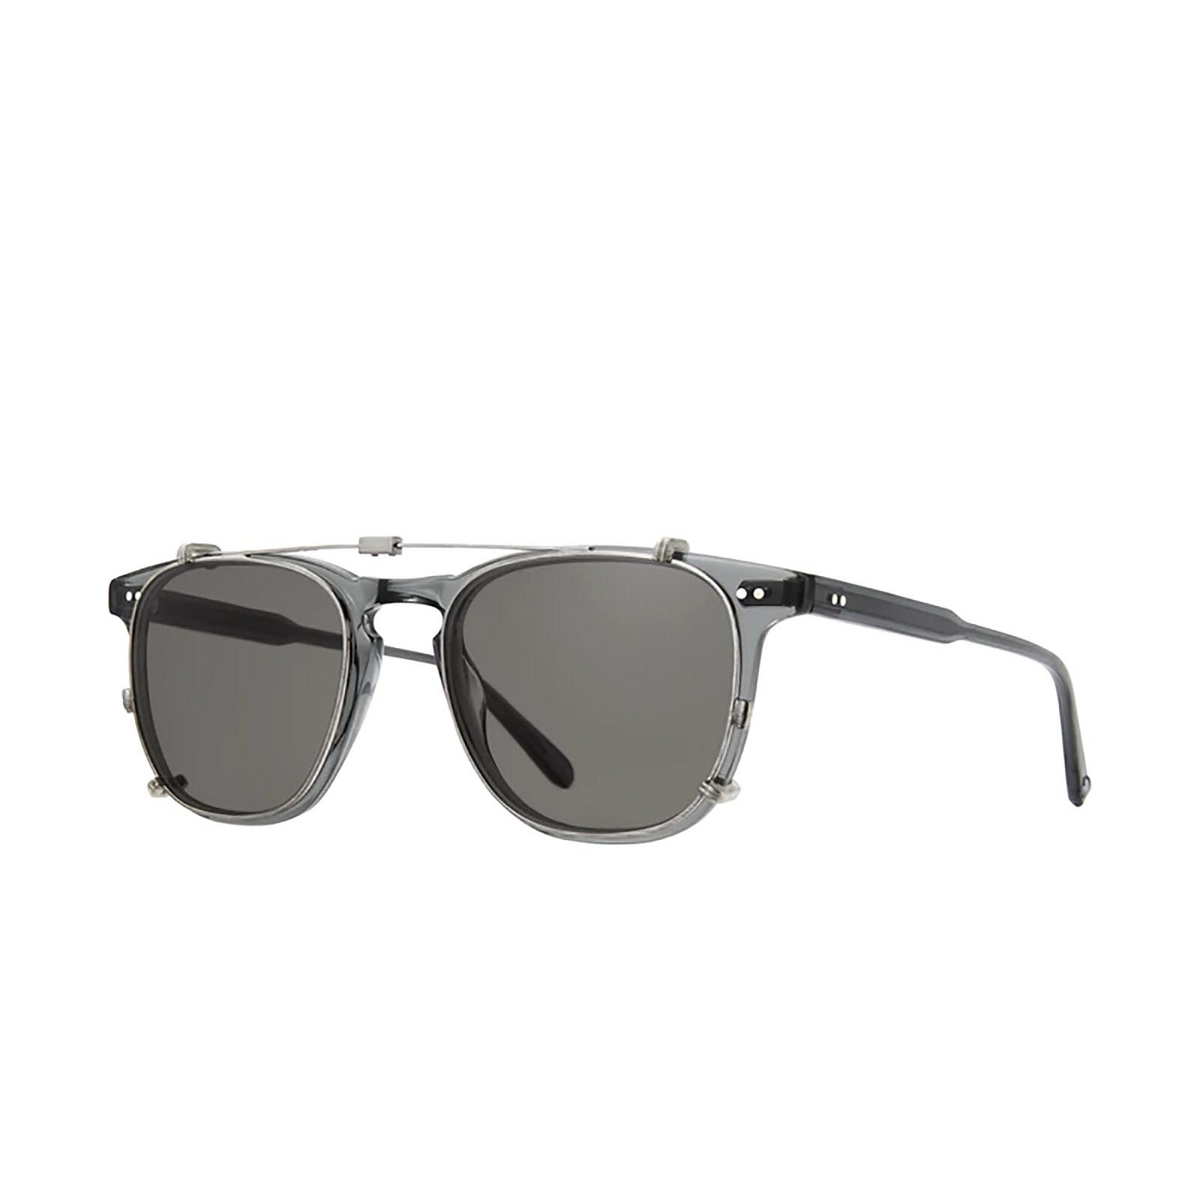 Garrett Leight BROOKS CLIP BS/G15 Brushed Silver BS/G15 Brushed Silver - tre quarti